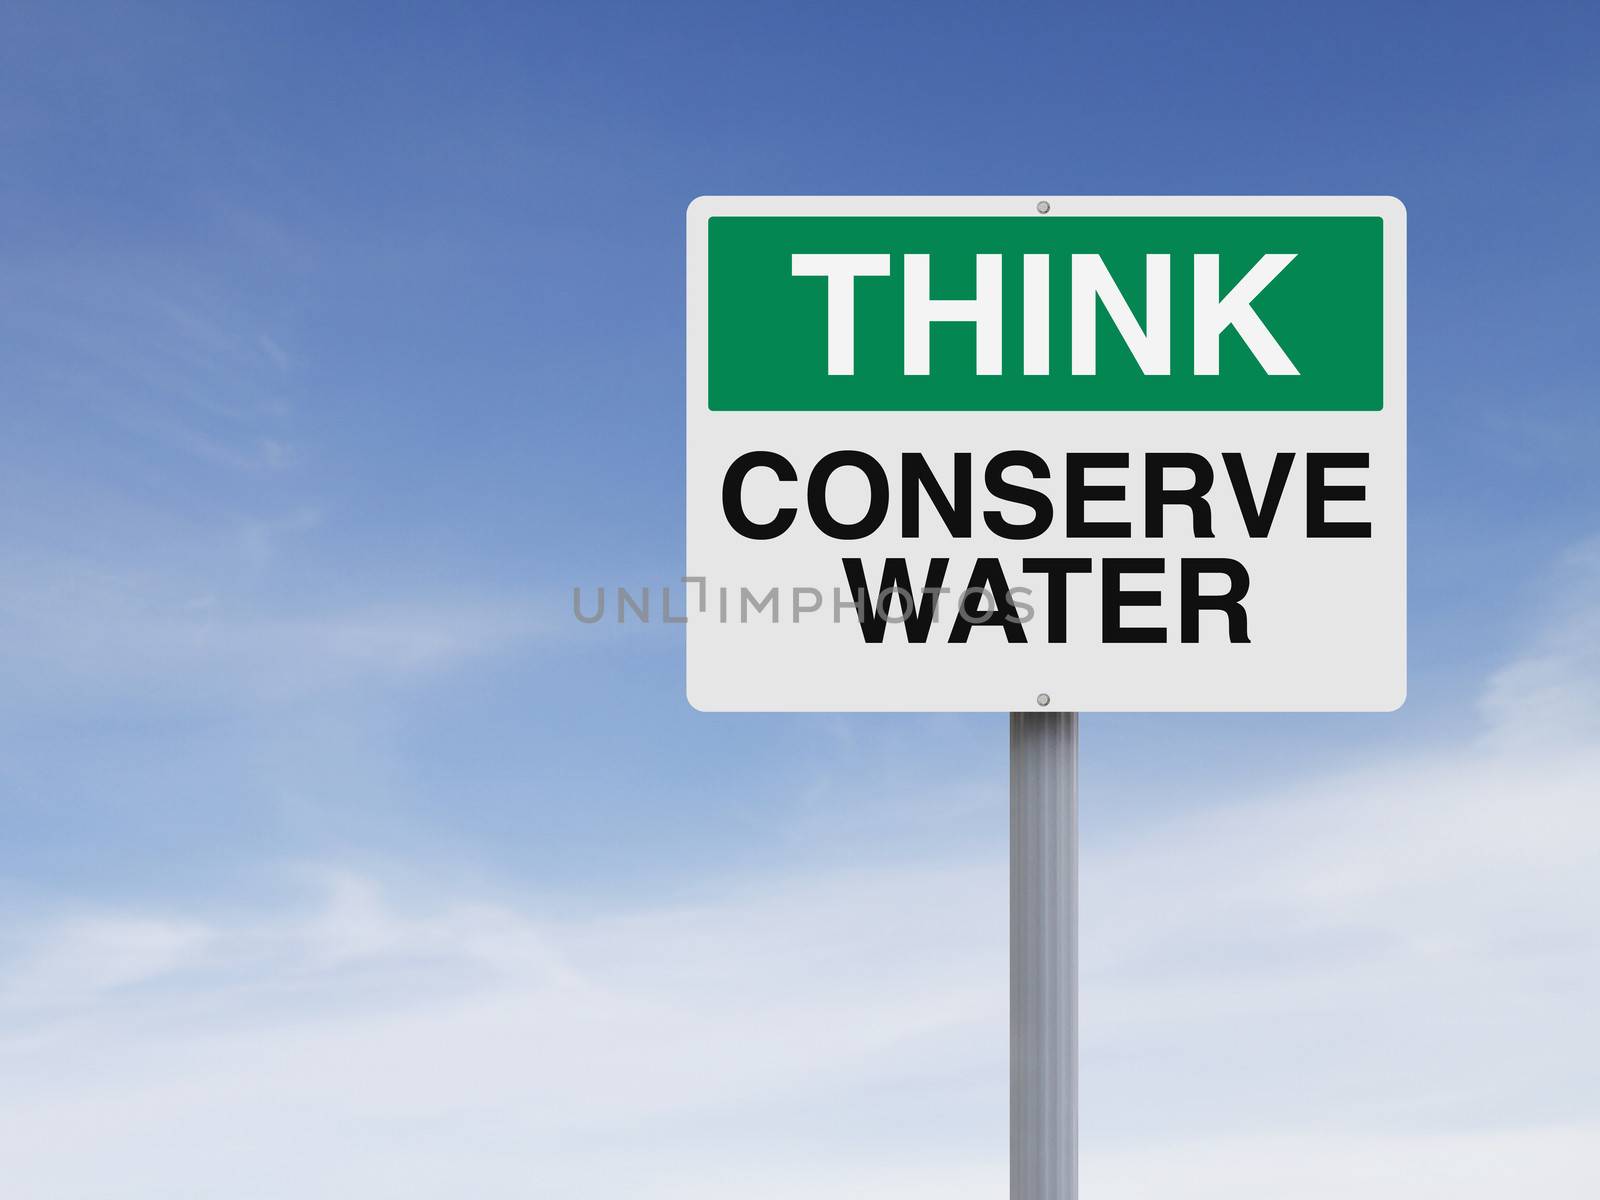 Conserve Water by rnl